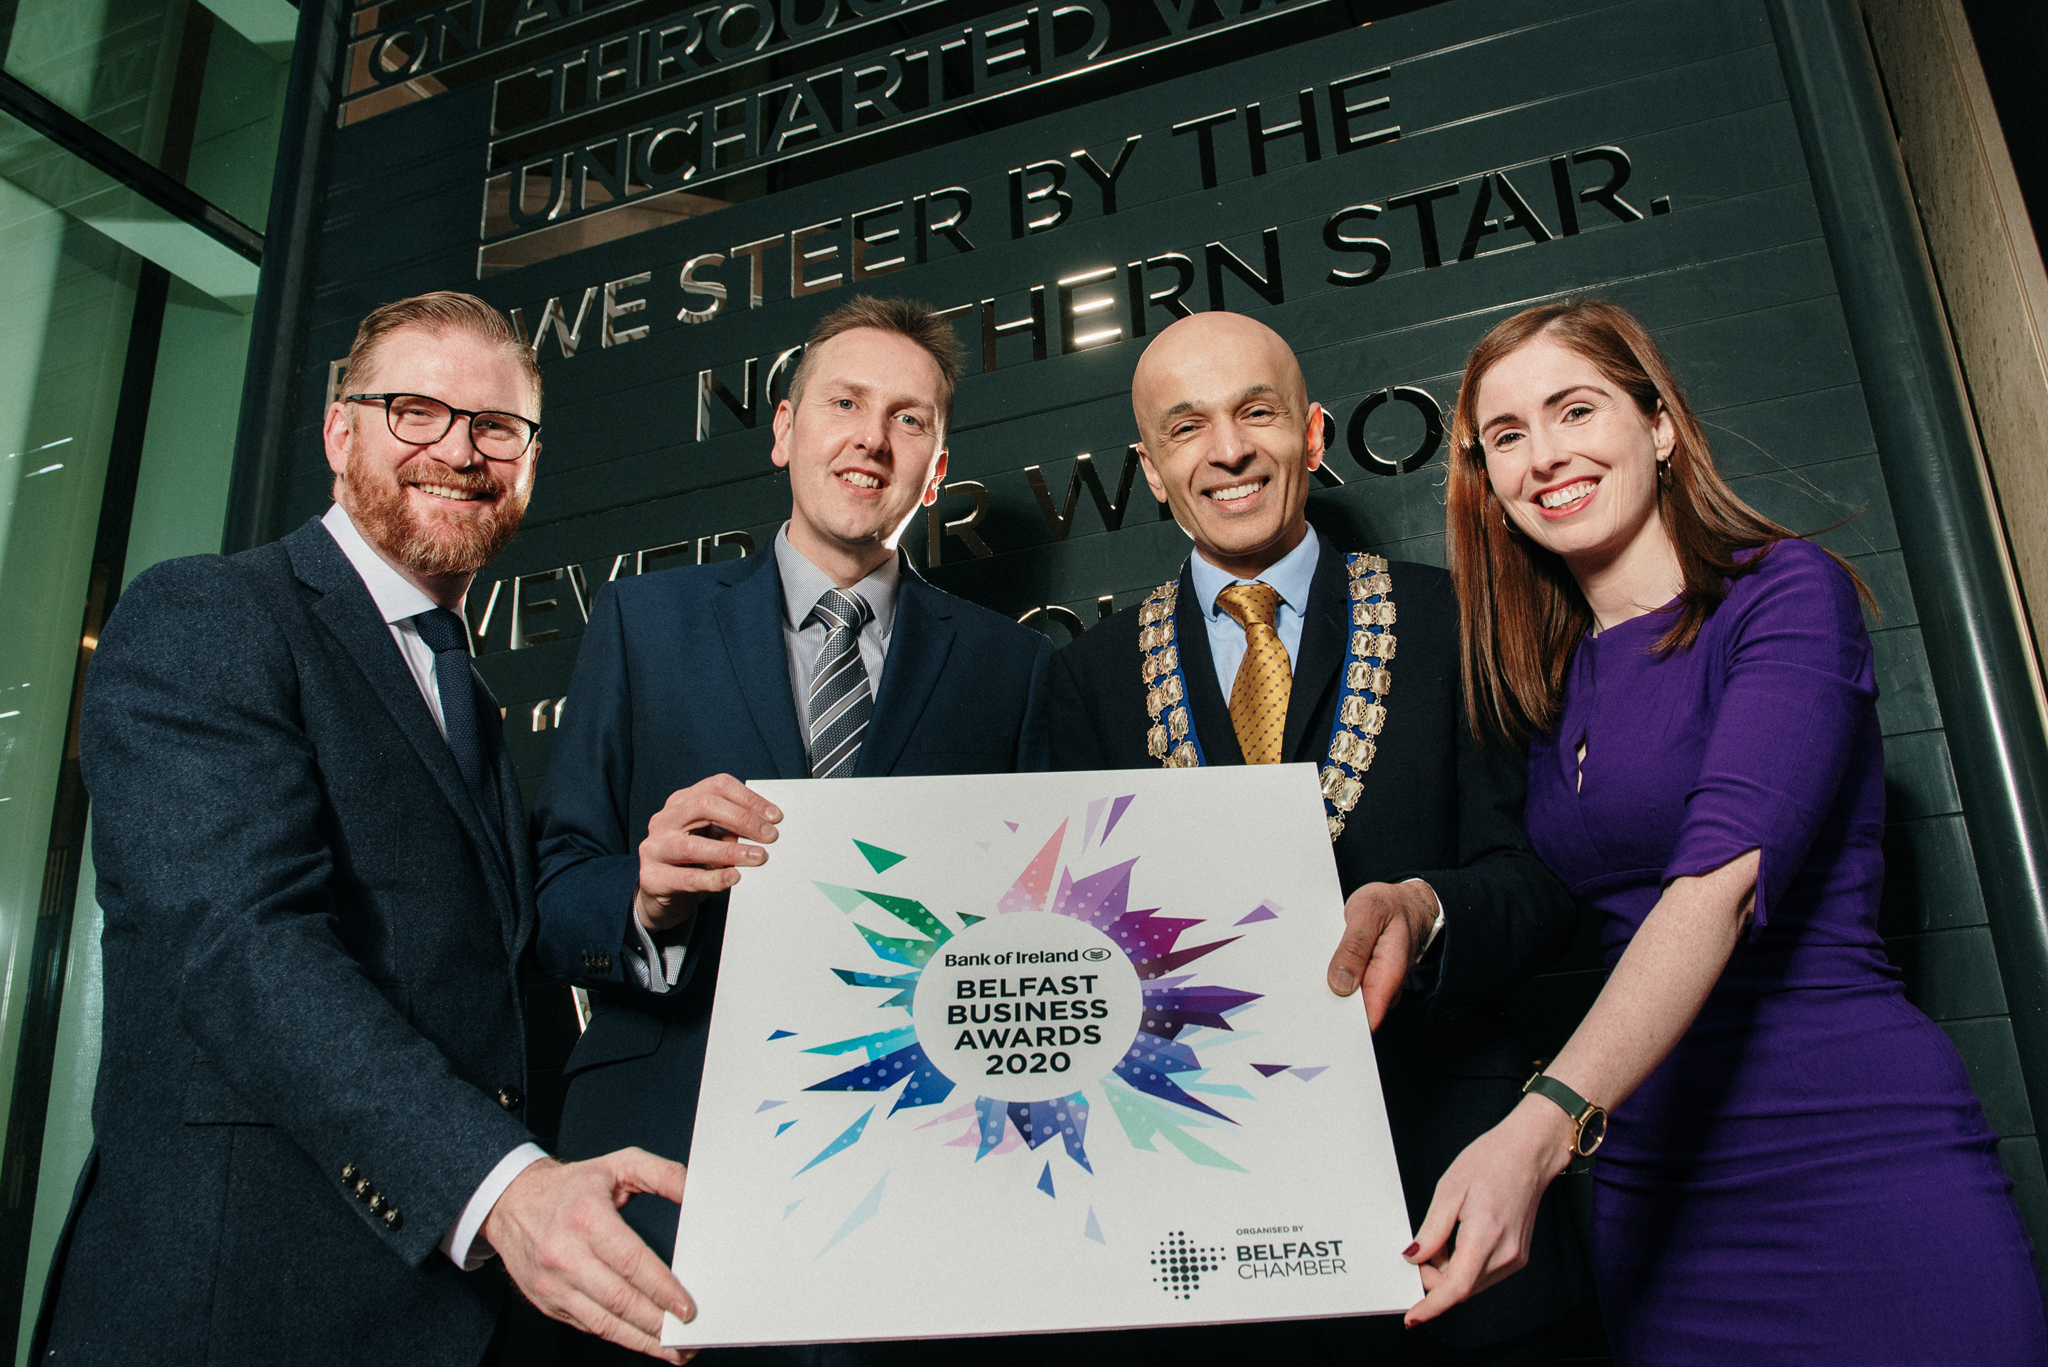 A group of people holding a Belfast Business Award 2020 sign